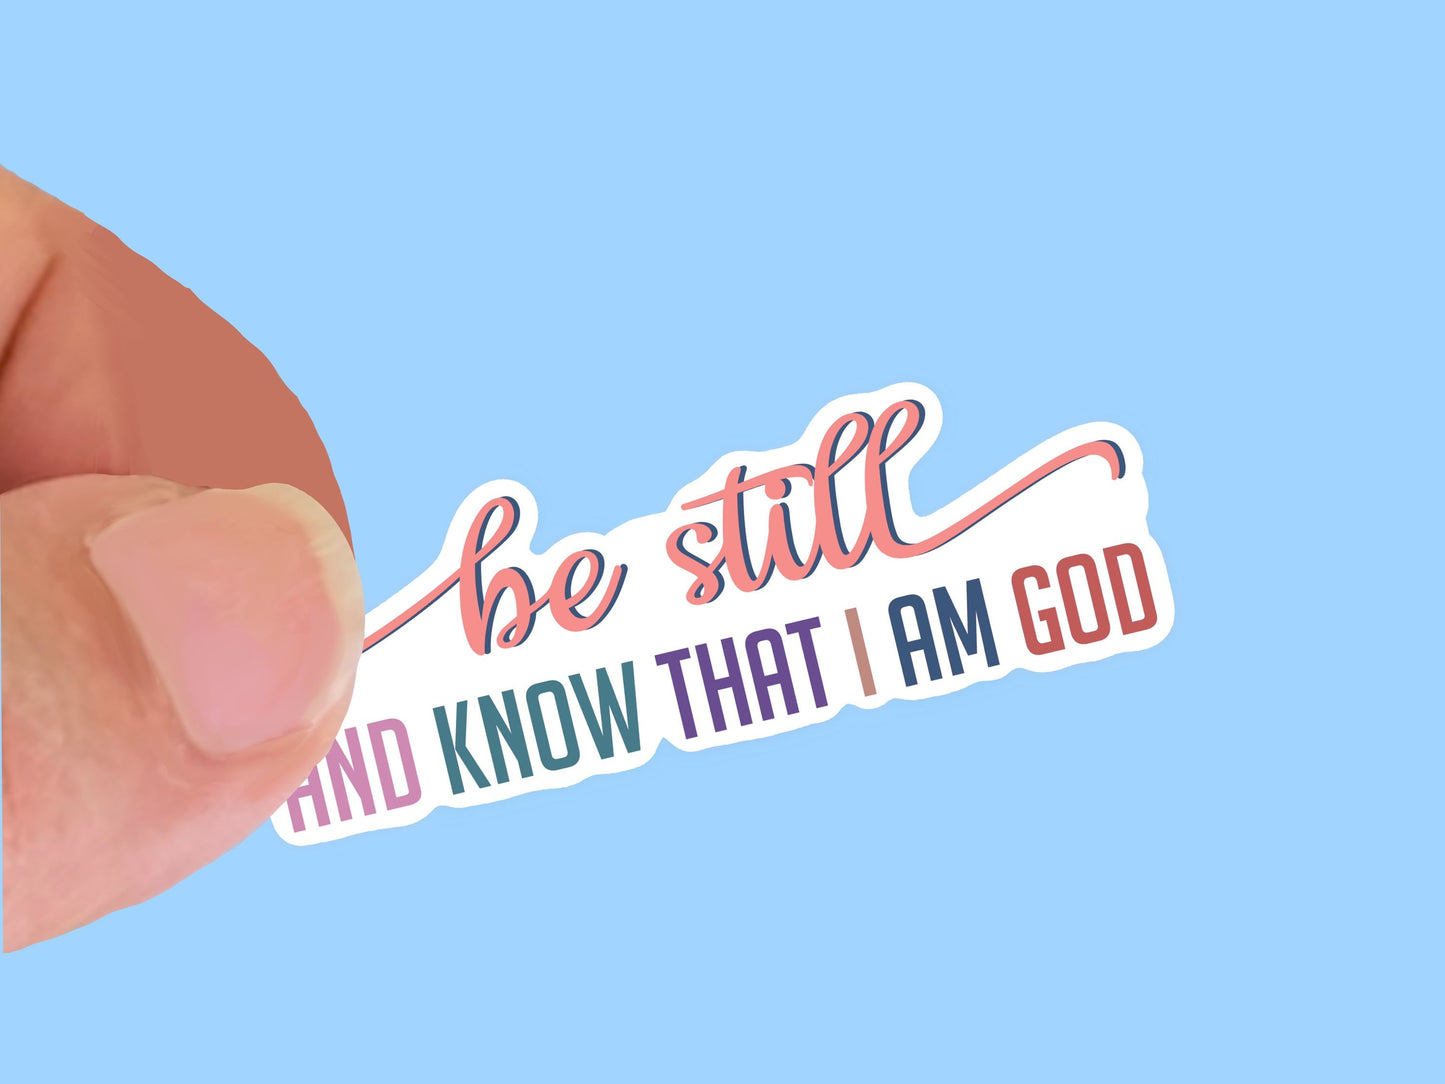 Be Still and Know That I am God, Christian Faith UV/ Waterproof Vinyl Sticker/ Decal- Choice of Size, Single or Bulk qty